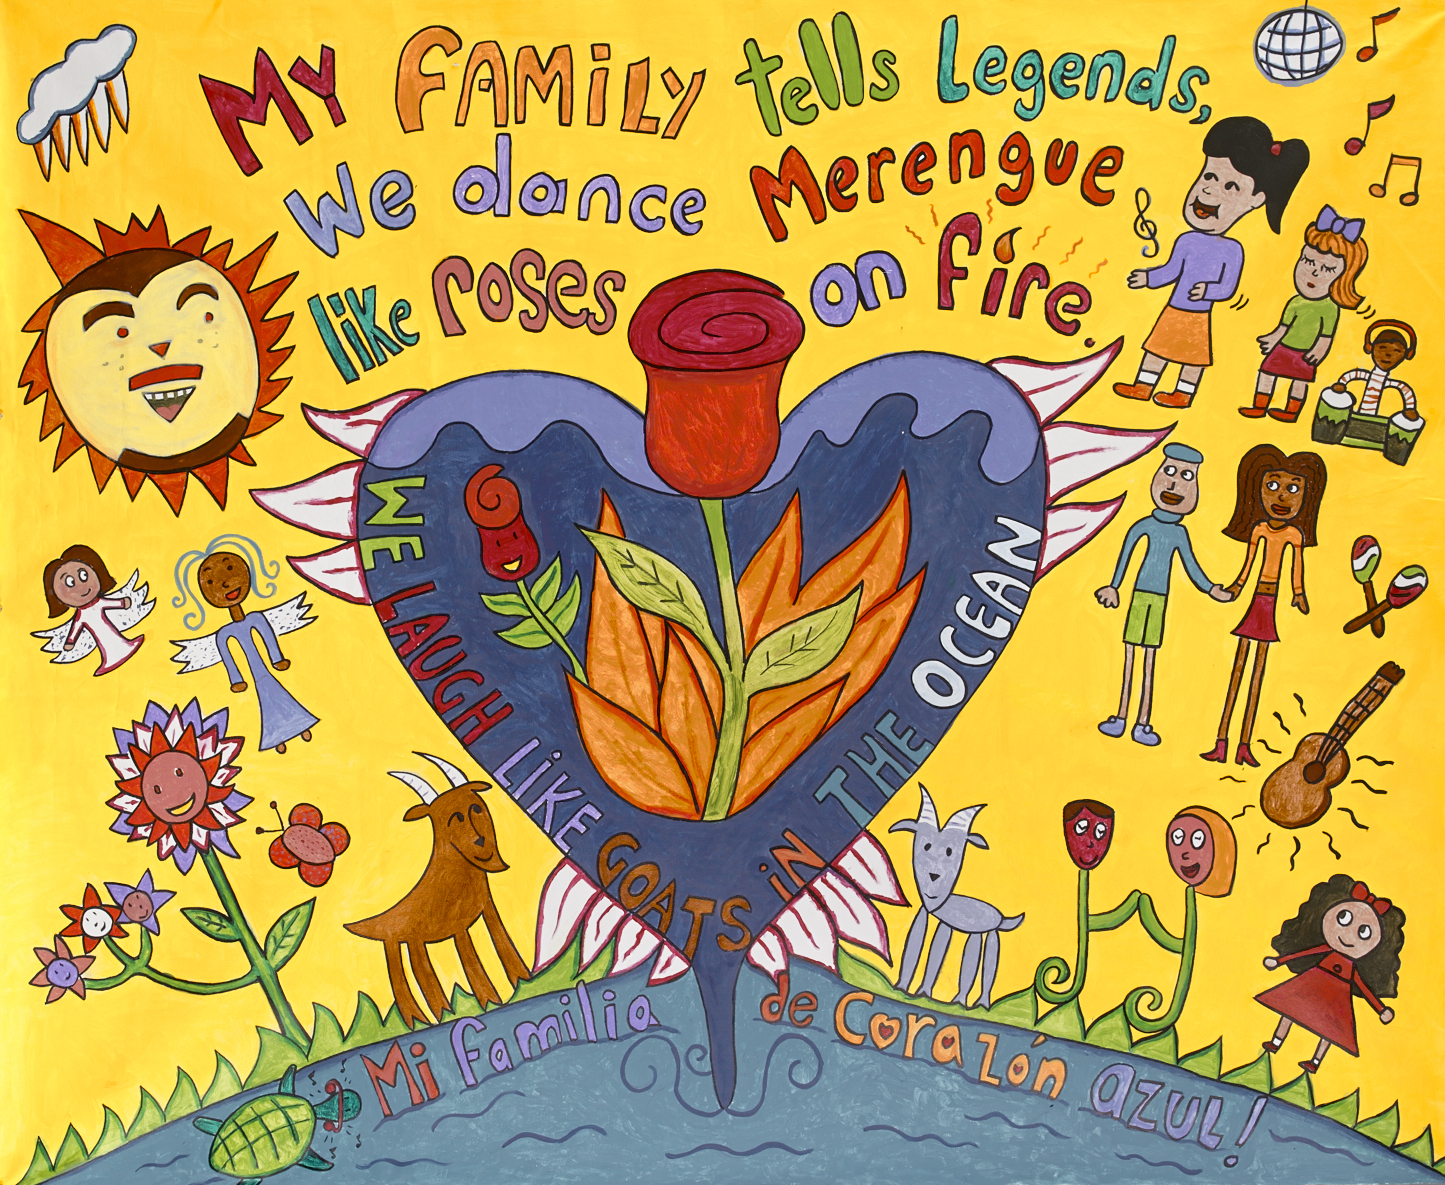 Colorful painting with a poem that reads: My family tells legends, we dance Merengue, like roses on fire, we laugh like goats in the ocean, mi familia de corazón azul.